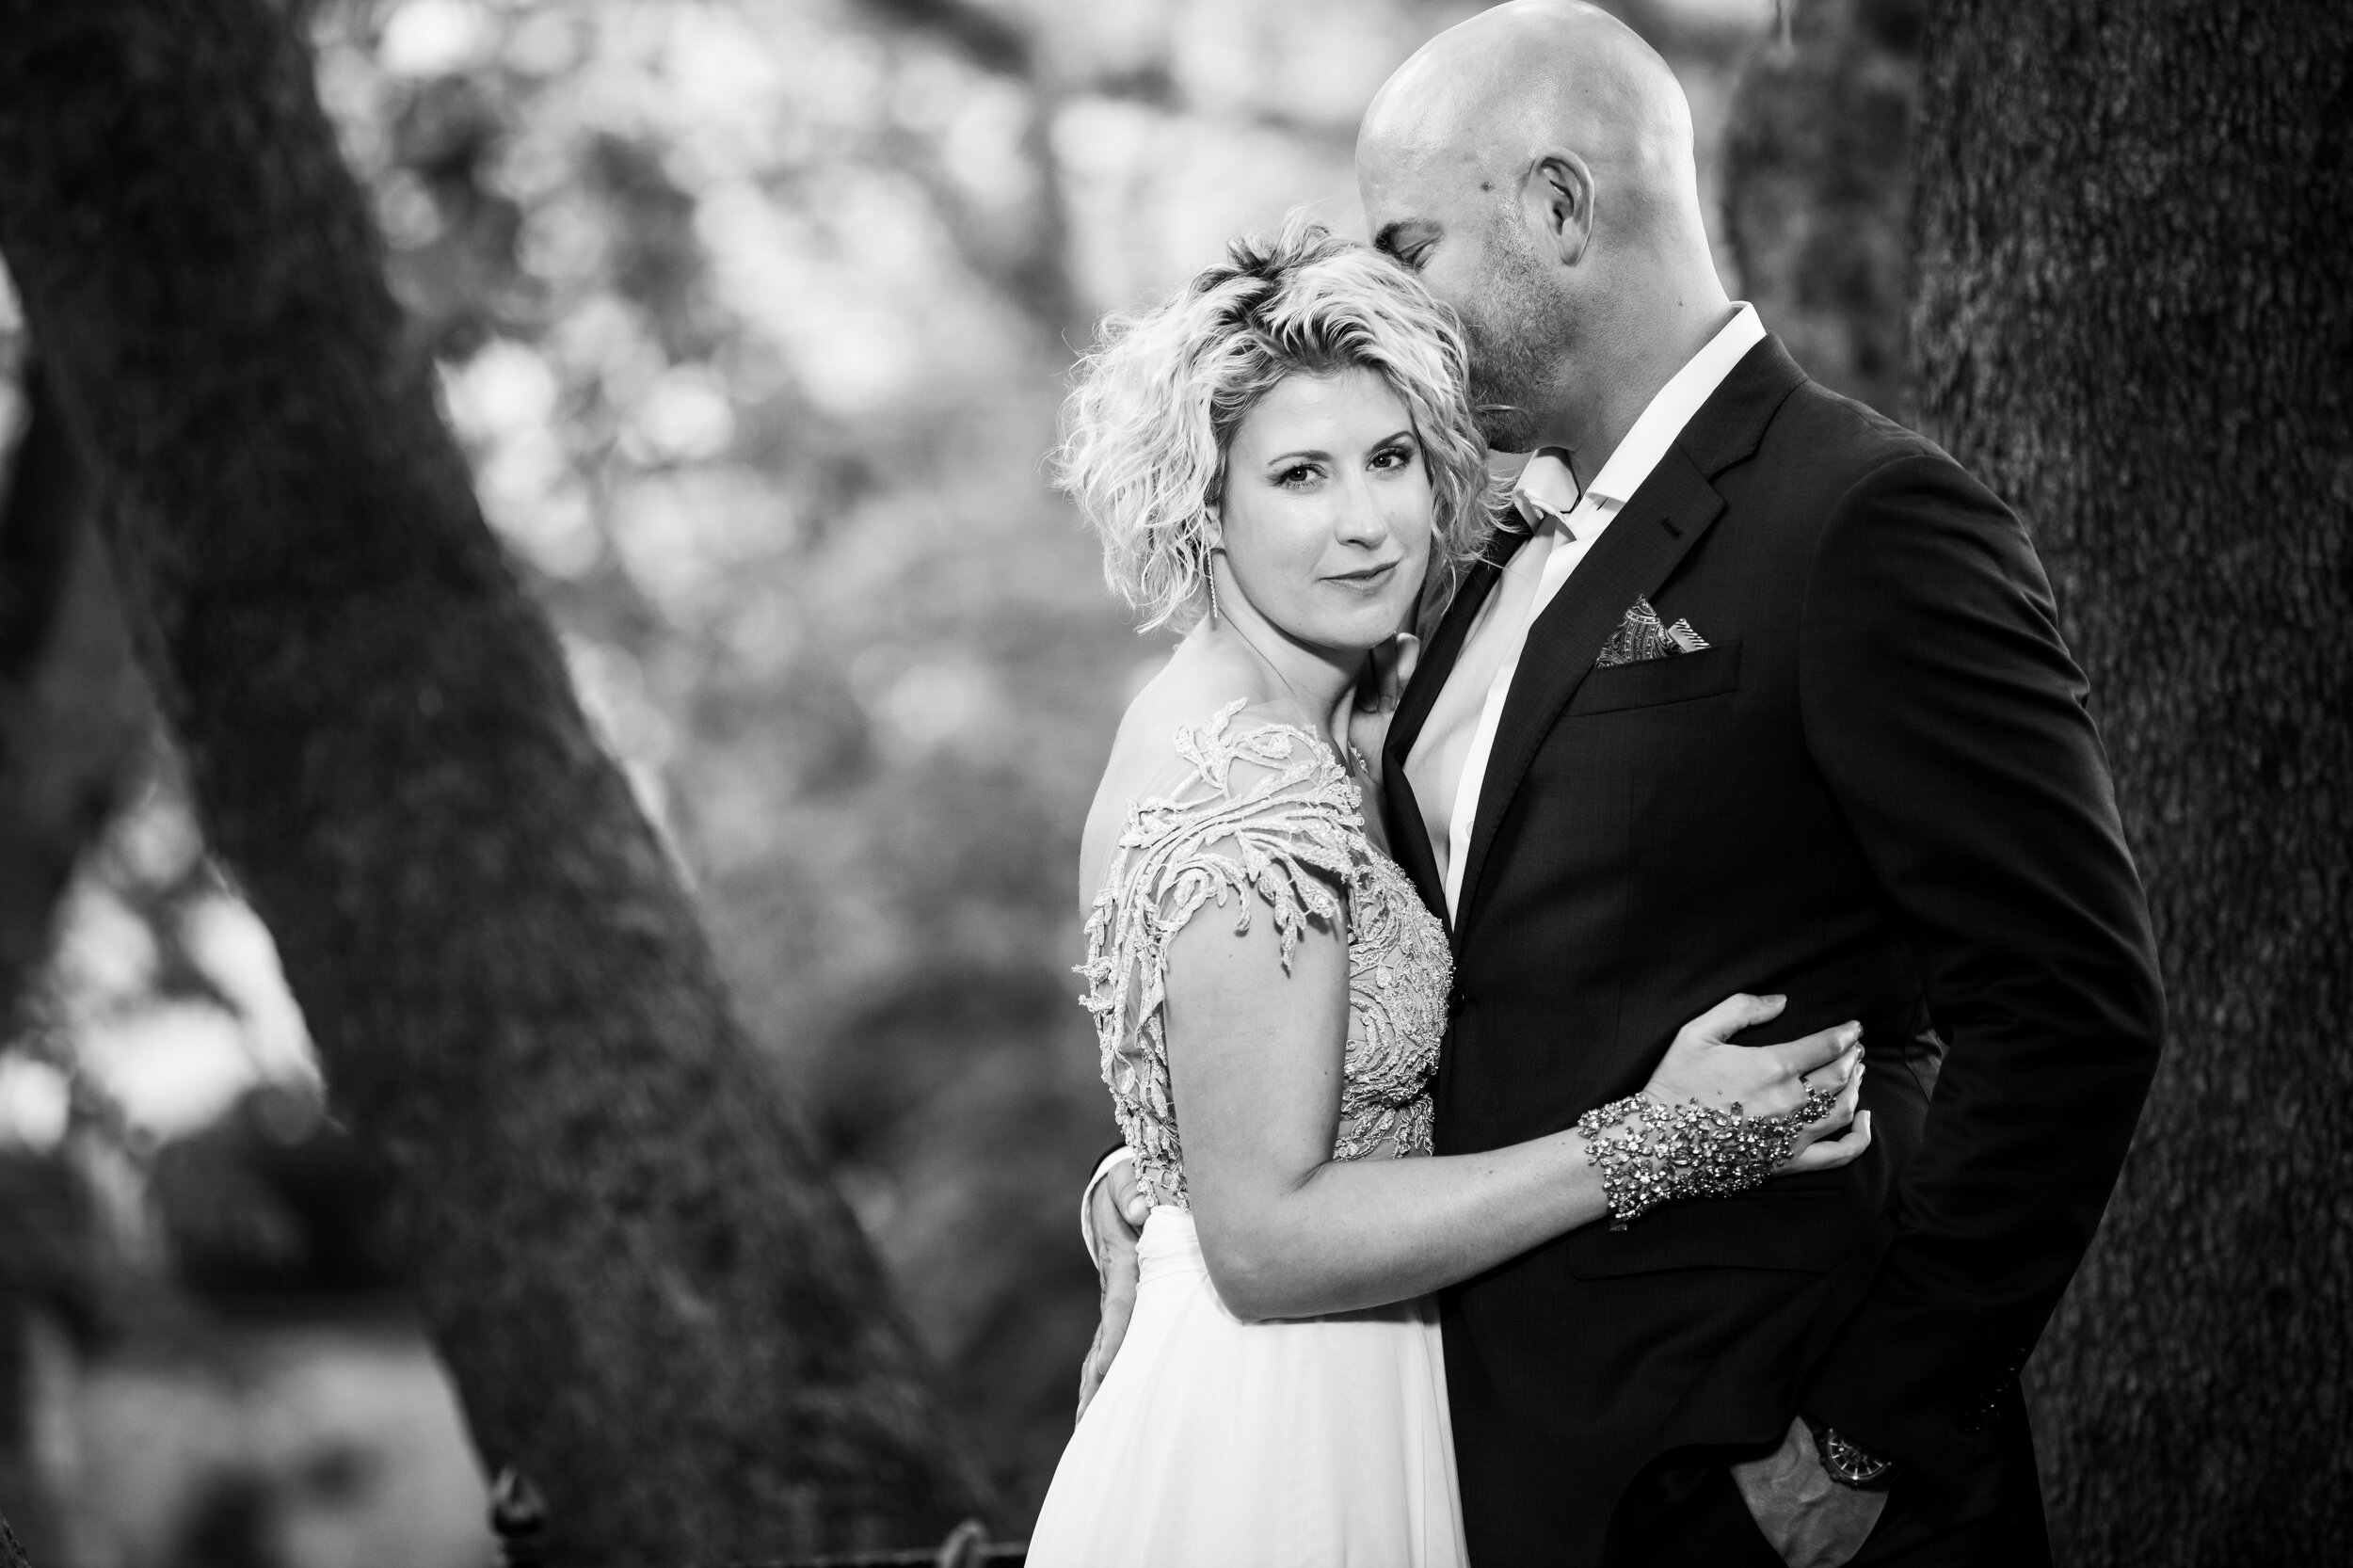 Black and white wedding portrait of the bride and groom:  destination wedding photo at the Lost Unicorn Hotel, Tsagarada, Greece by J. Brown Photography.